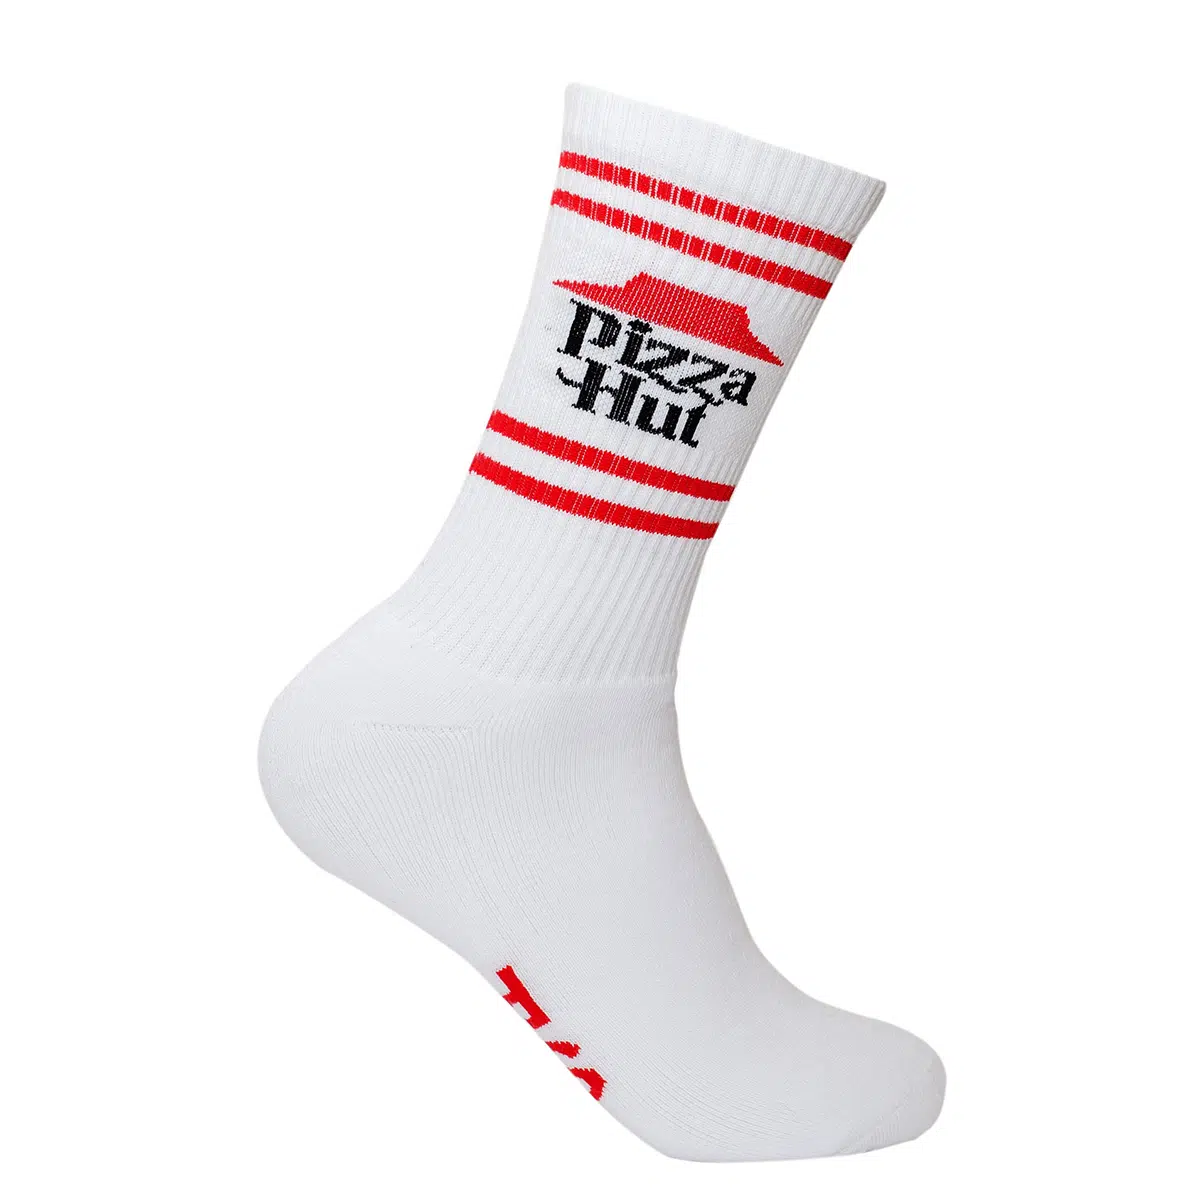 Quote form - ks11 premium sports crew socks with reinforced ribbing and terry lining on sole 1 1